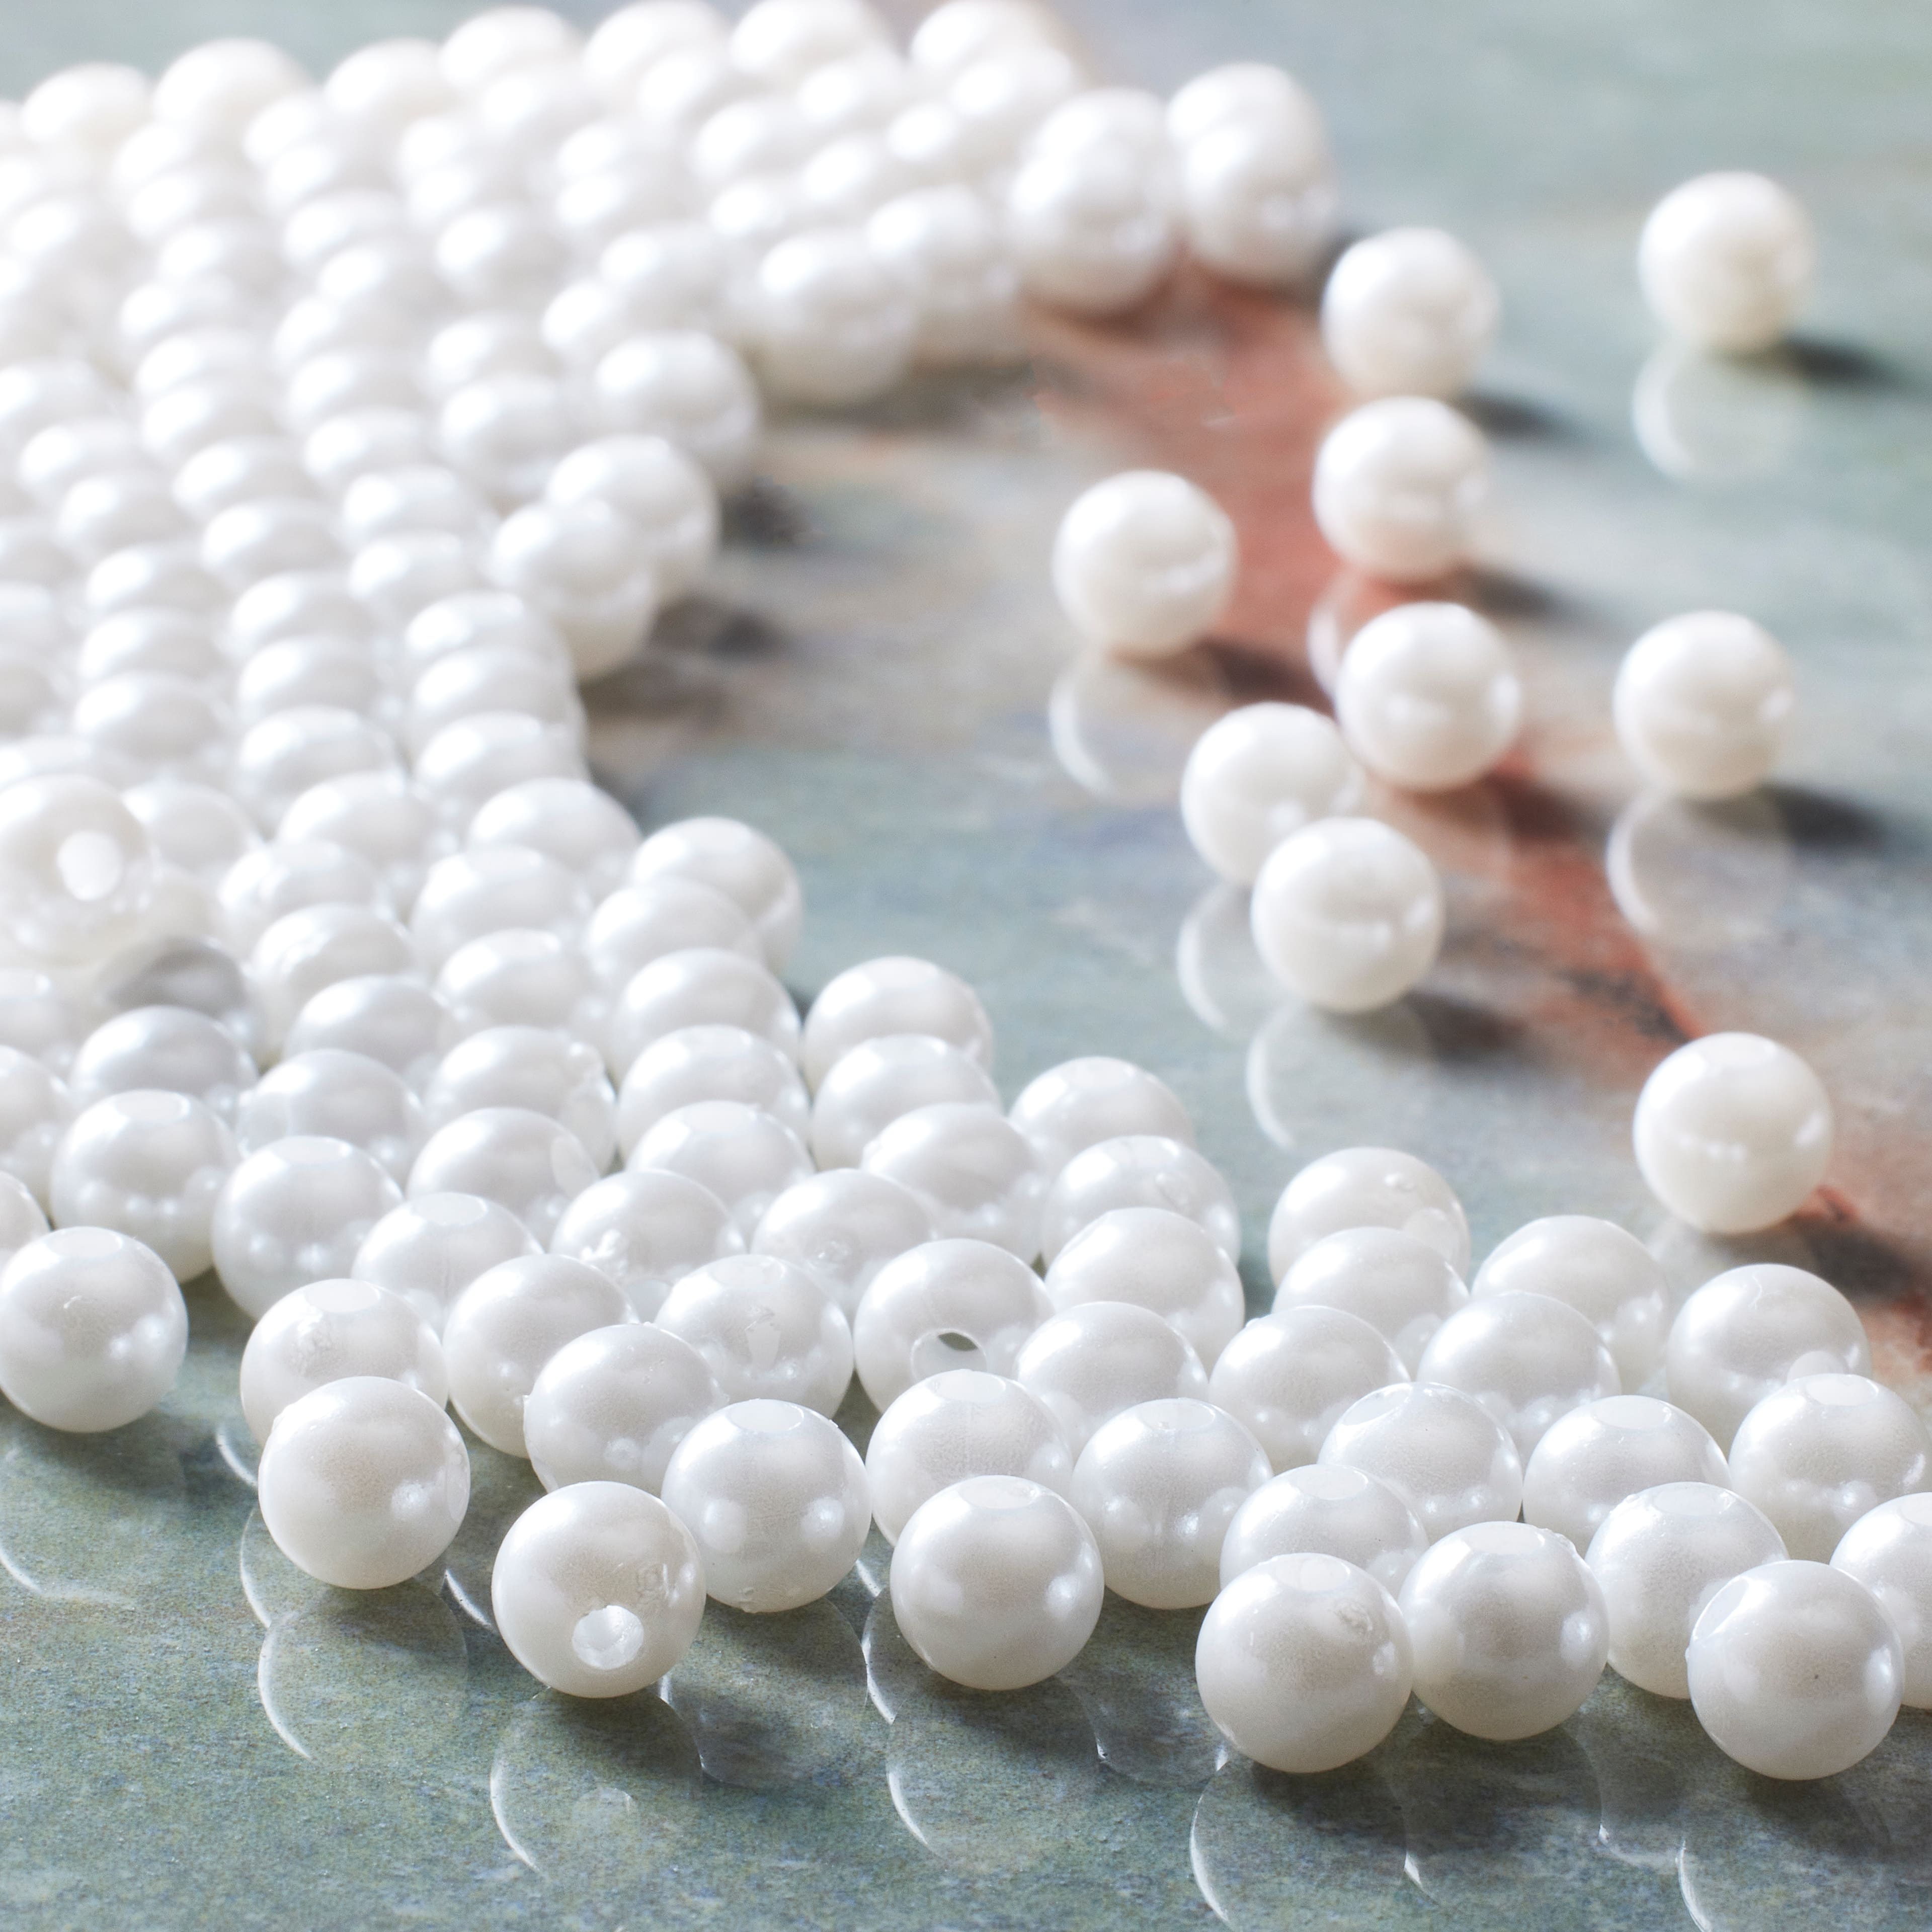 12 Pack: White Pearl Round Beads by Bead Landing&#x2122;